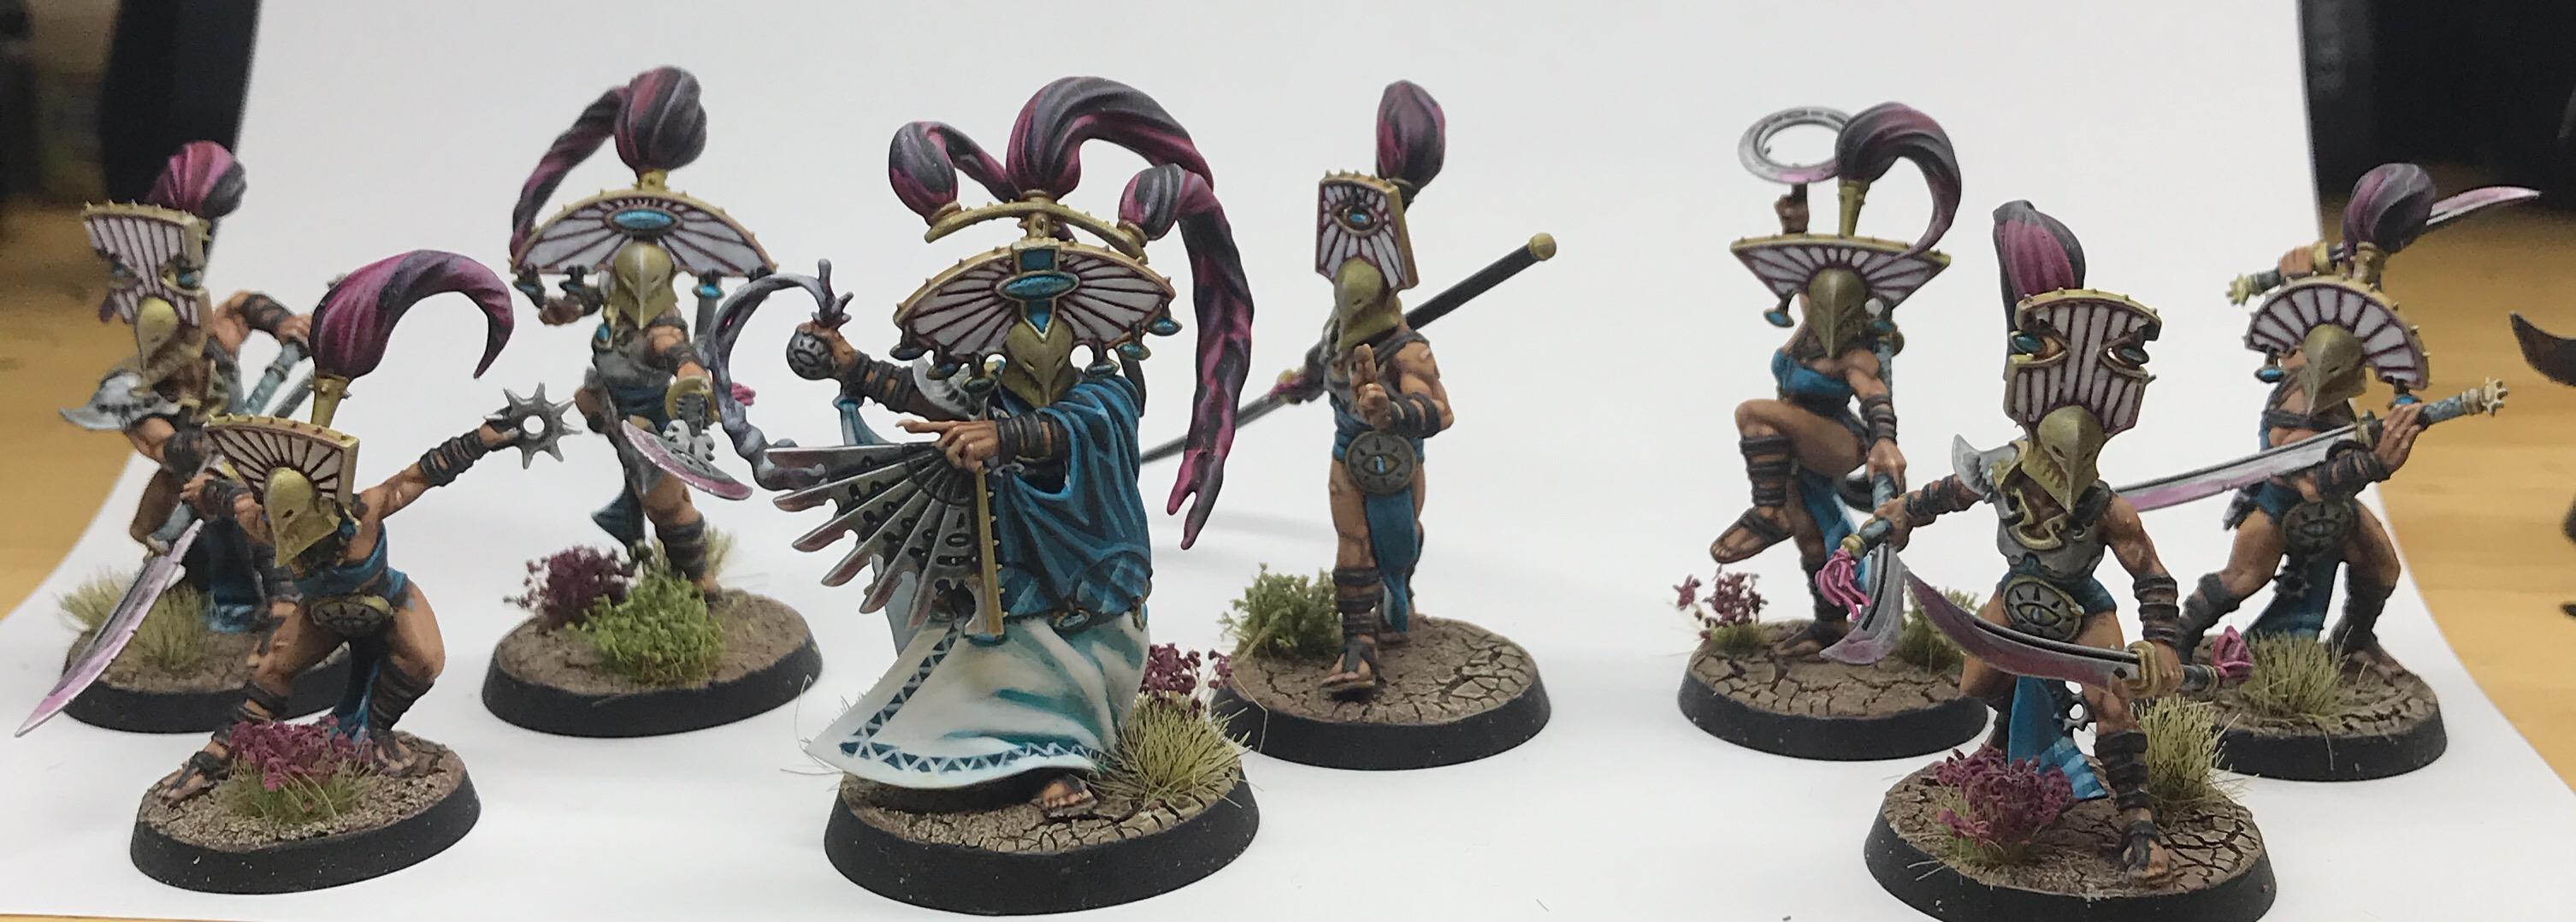 Warcry, cypher lords